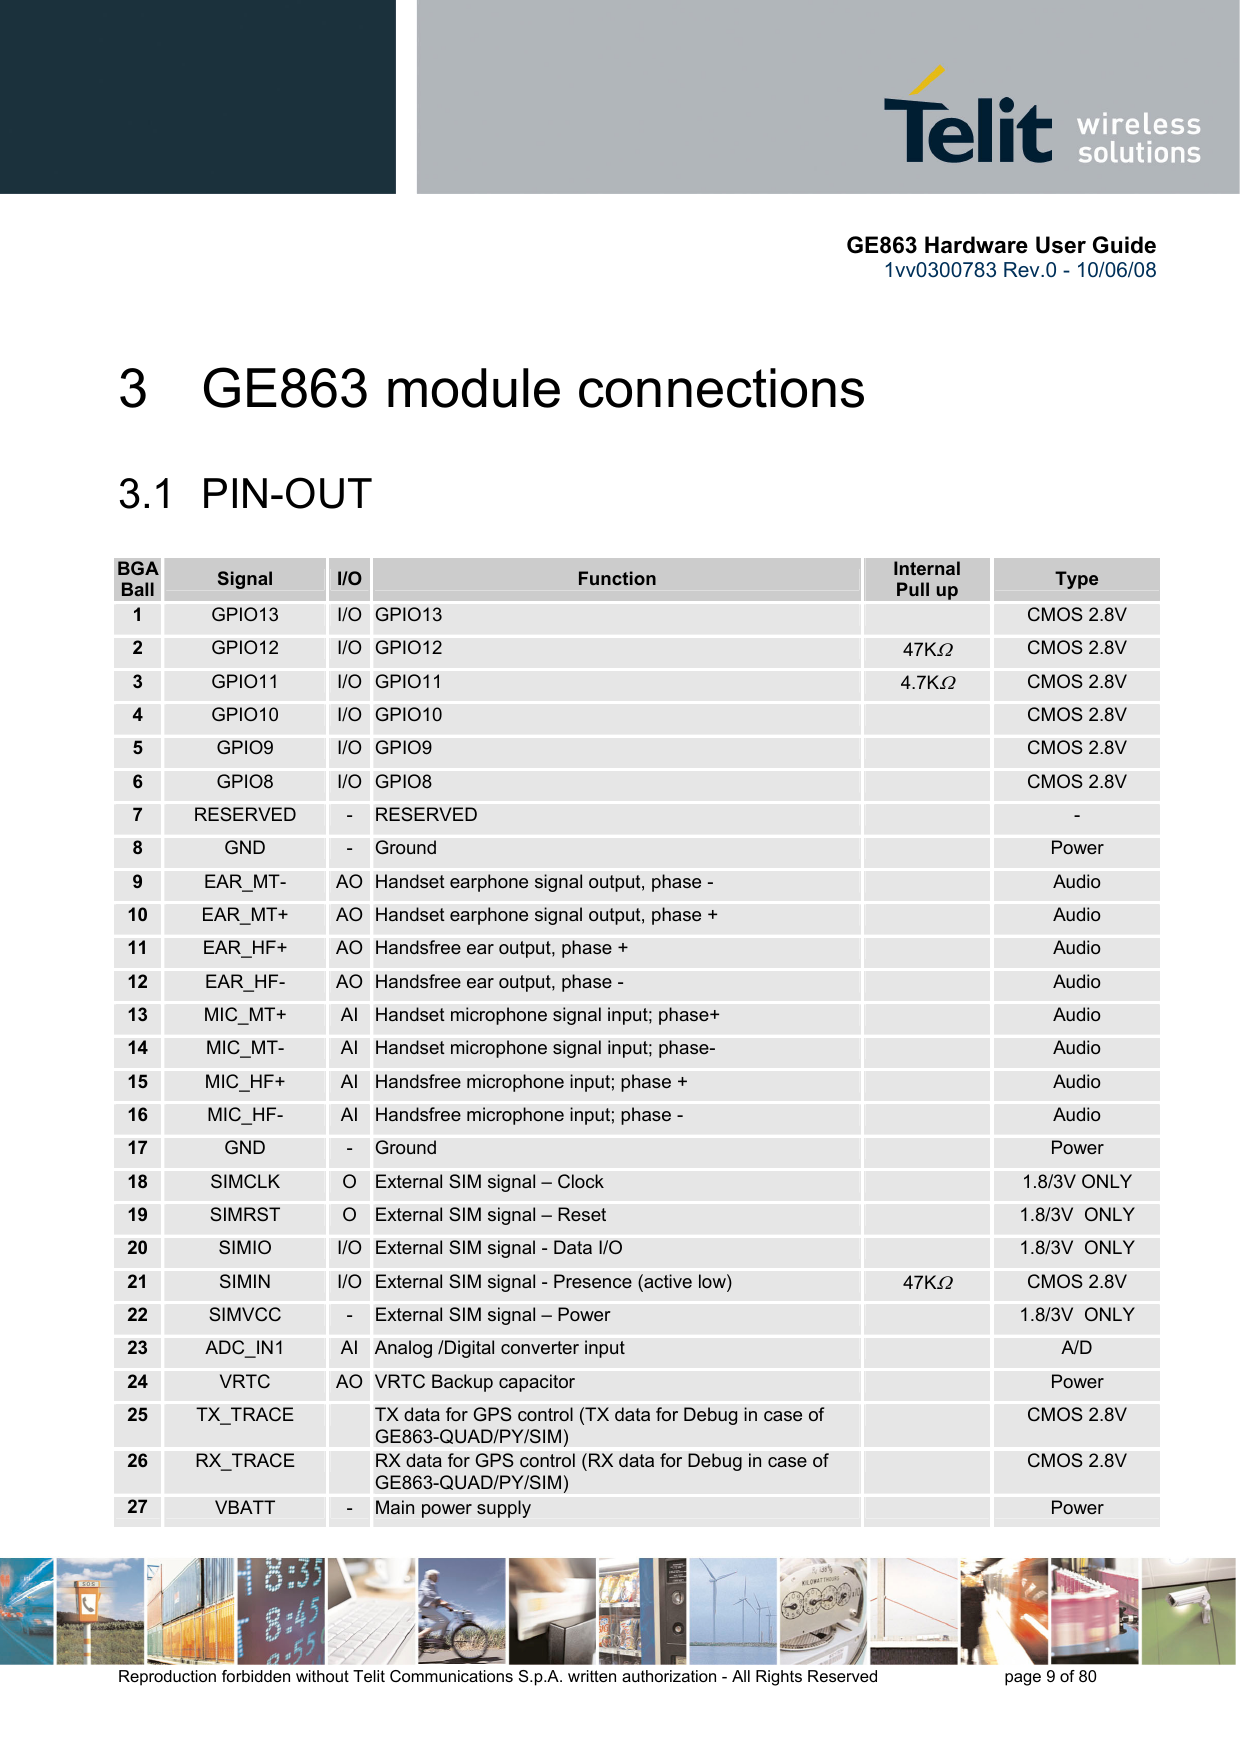       GE863 Hardware User Guide 1vv0300783 Rev.0 - 10/06/08 Reproduction forbidden without Telit Communications S.p.A. written authorization - All Rights Reserved    page 9 of 80  3  GE863 module connections  3.1 PIN-OUT BGA Ball  Signal  I/O  Function  Internal Pull up  Type 1  GPIO13  I/O  GPIO13    CMOS 2.8V 2  GPIO12  I/O  GPIO12   47KΩ CMOS 2.8V 3  GPIO11  I/O  GPIO11   4.7KΩ CMOS 2.8V 4  GPIO10  I/O  GPIO10    CMOS 2.8V 5  GPIO9   I/O  GPIO9    CMOS 2.8V 6  GPIO8   I/O  GPIO8    CMOS 2.8V 7  RESERVED  -  RESERVED   - 8  GND  -  Ground    Power 9  EAR_MT-  AO  Handset earphone signal output, phase -   Audio 10  EAR_MT+  AO  Handset earphone signal output, phase +   Audio 11  EAR_HF+  AO  Handsfree ear output, phase +   Audio 12  EAR_HF-  AO  Handsfree ear output, phase -   Audio 13  MIC_MT+  AI  Handset microphone signal input; phase+   Audio 14  MIC_MT-  AI  Handset microphone signal input; phase-   Audio 15  MIC_HF+  AI  Handsfree microphone input; phase +   Audio 16  MIC_HF-  AI  Handsfree microphone input; phase -   Audio 17  GND  -  Ground    Power 18  SIMCLK  O  External SIM signal – Clock   1.8/3V ONLY 19  SIMRST  O  External SIM signal – Reset   1.8/3V  ONLY 20  SIMIO  I/O  External SIM signal - Data I/O   1.8/3V  ONLY 21  SIMIN  I/O  External SIM signal - Presence (active low)  47KΩ CMOS 2.8V 22  SIMVCC  -  External SIM signal – Power    1.8/3V  ONLY 23  ADC_IN1  AI  Analog /Digital converter input   A/D 24  VRTC  AO  VRTC Backup capacitor    Power 25  TX_TRACE   TX data for GPS control (TX data for Debug in case of GE863-QUAD/PY/SIM)  CMOS 2.8V 26  RX_TRACE   RX data for GPS control (RX data for Debug in case of GE863-QUAD/PY/SIM)  CMOS 2.8V 27  VBATT  -  Main power supply    Power 